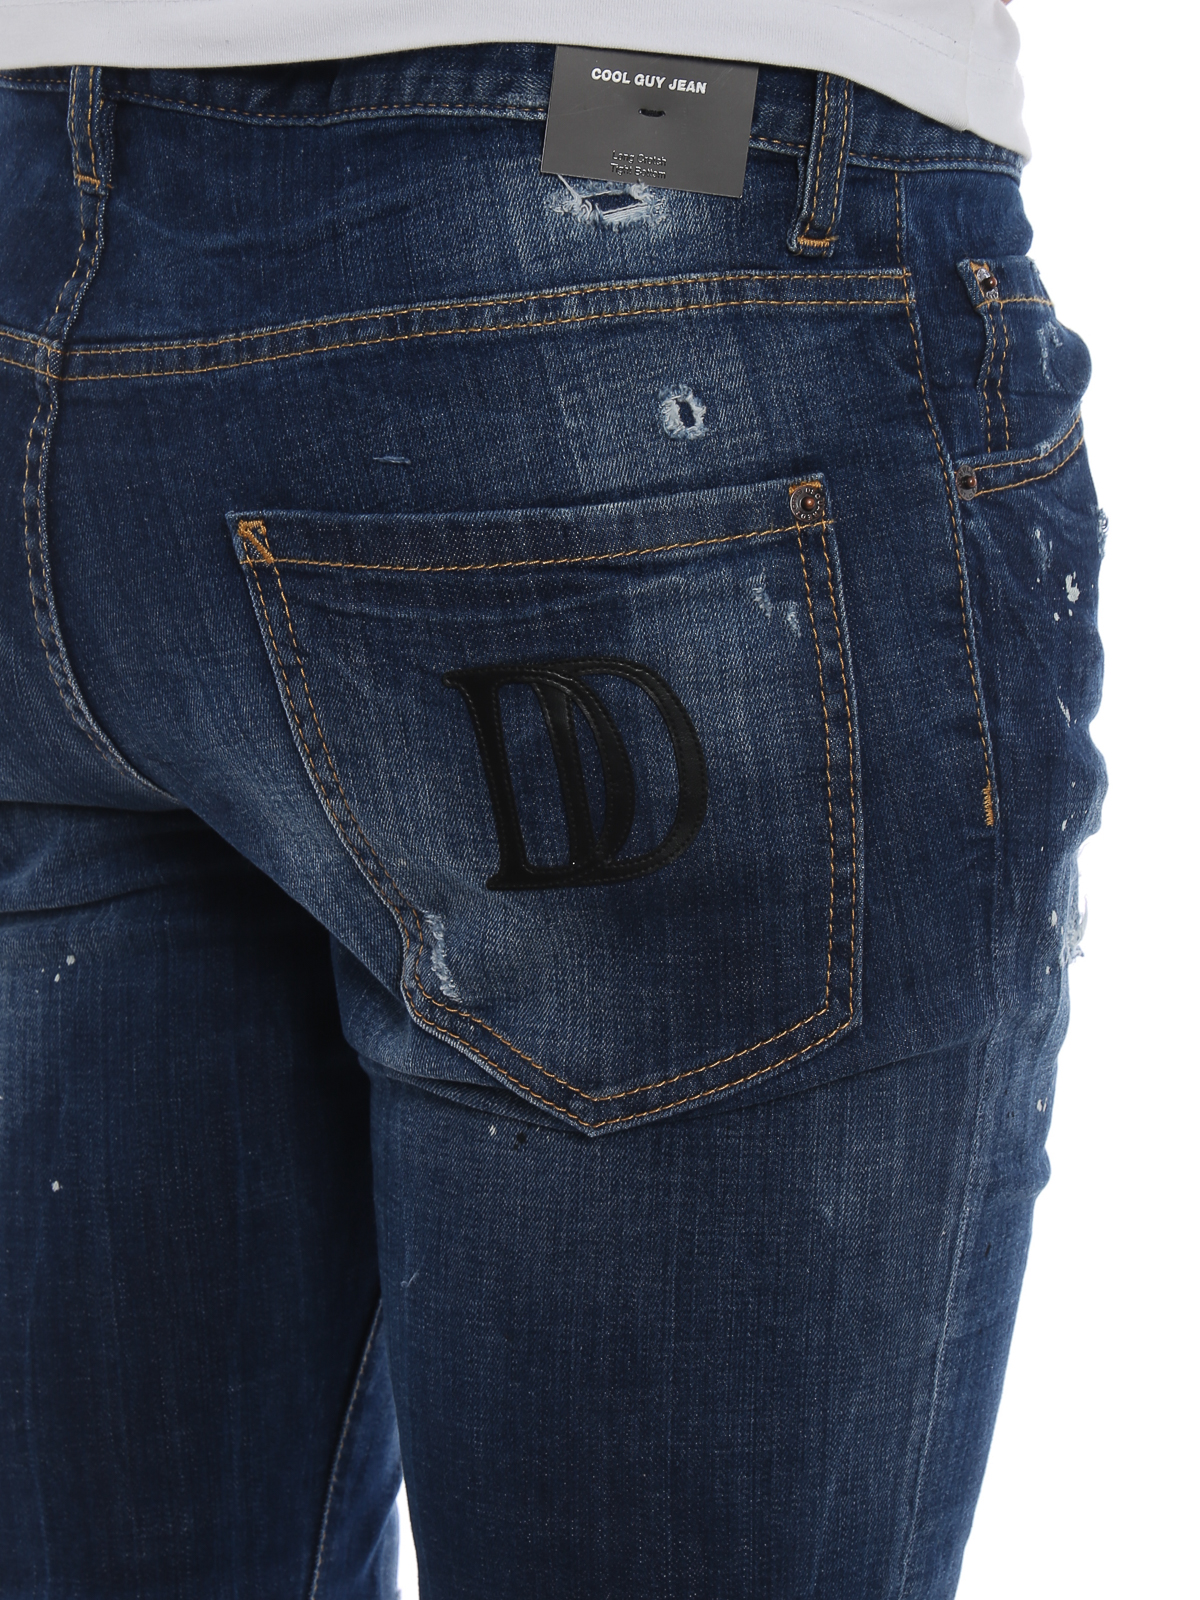 jean dsquared patch